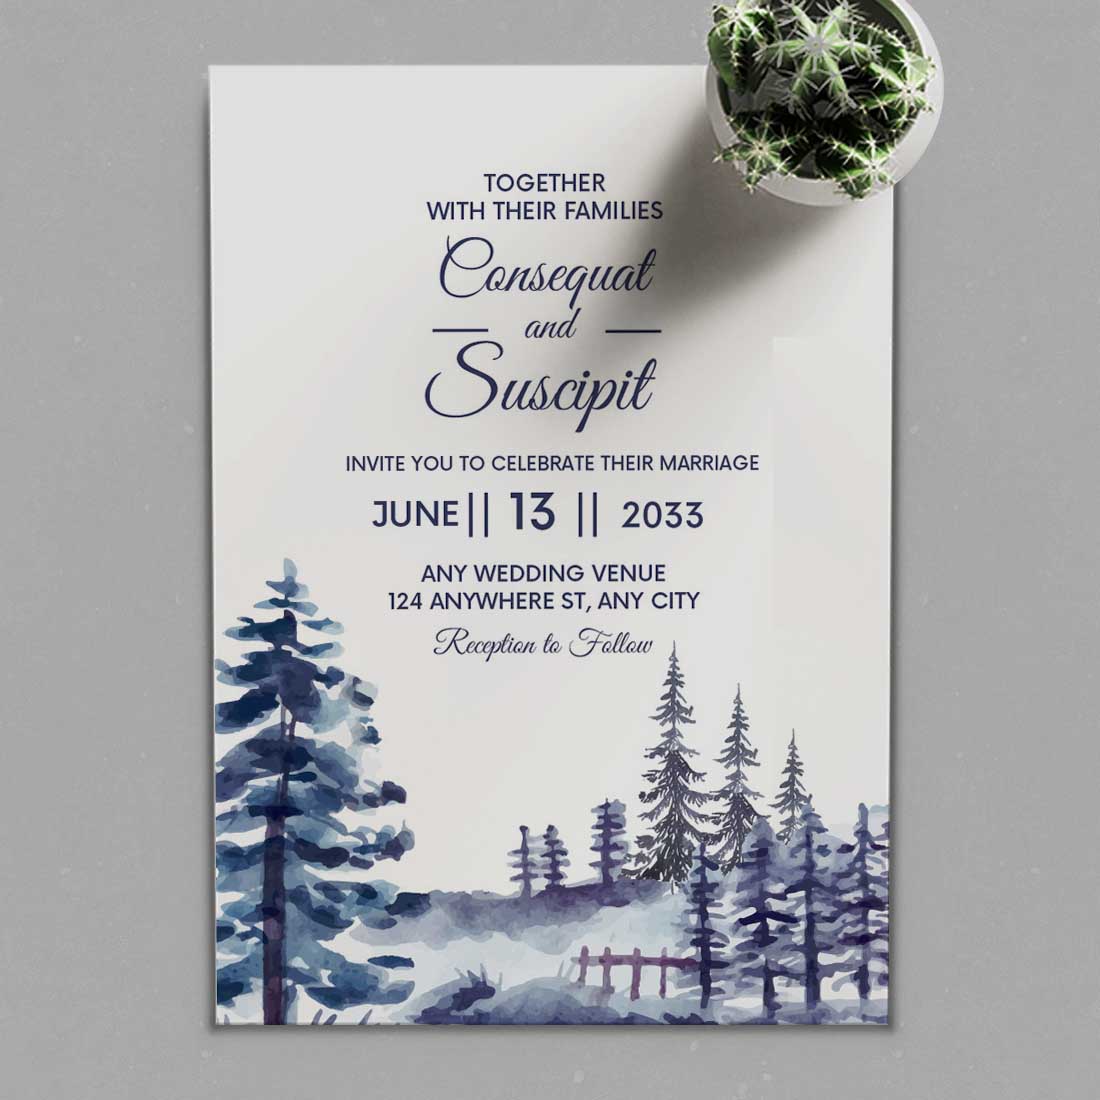 Winter Wedding Card Template with Frozen Landscape preview.